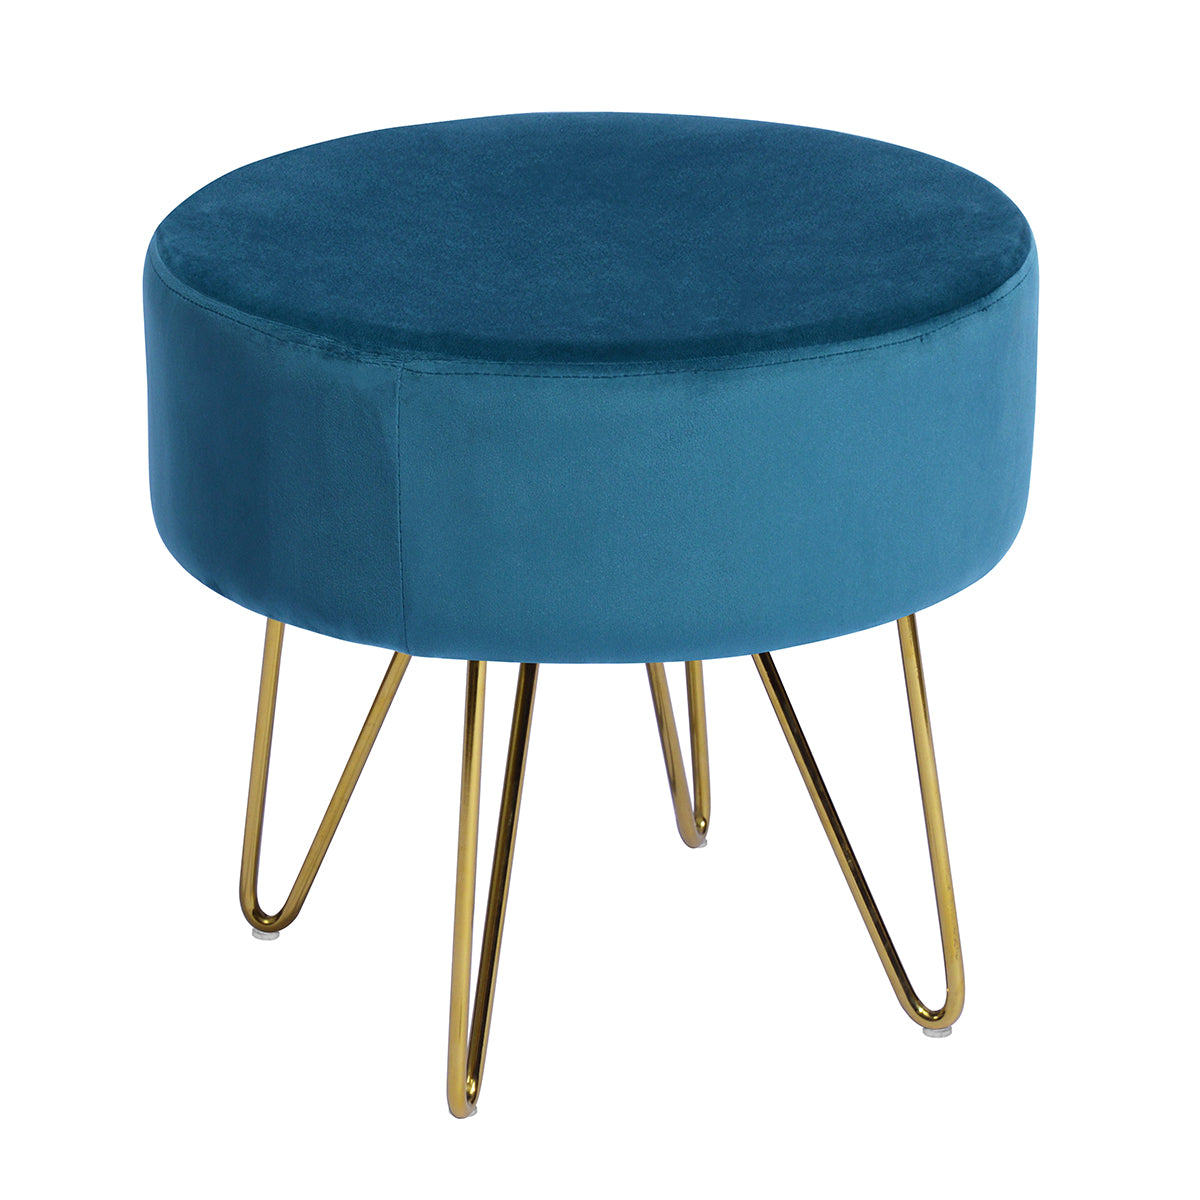 17.7& Teal and Gold Decorative Round Shaped Ottoman with Metal Legs